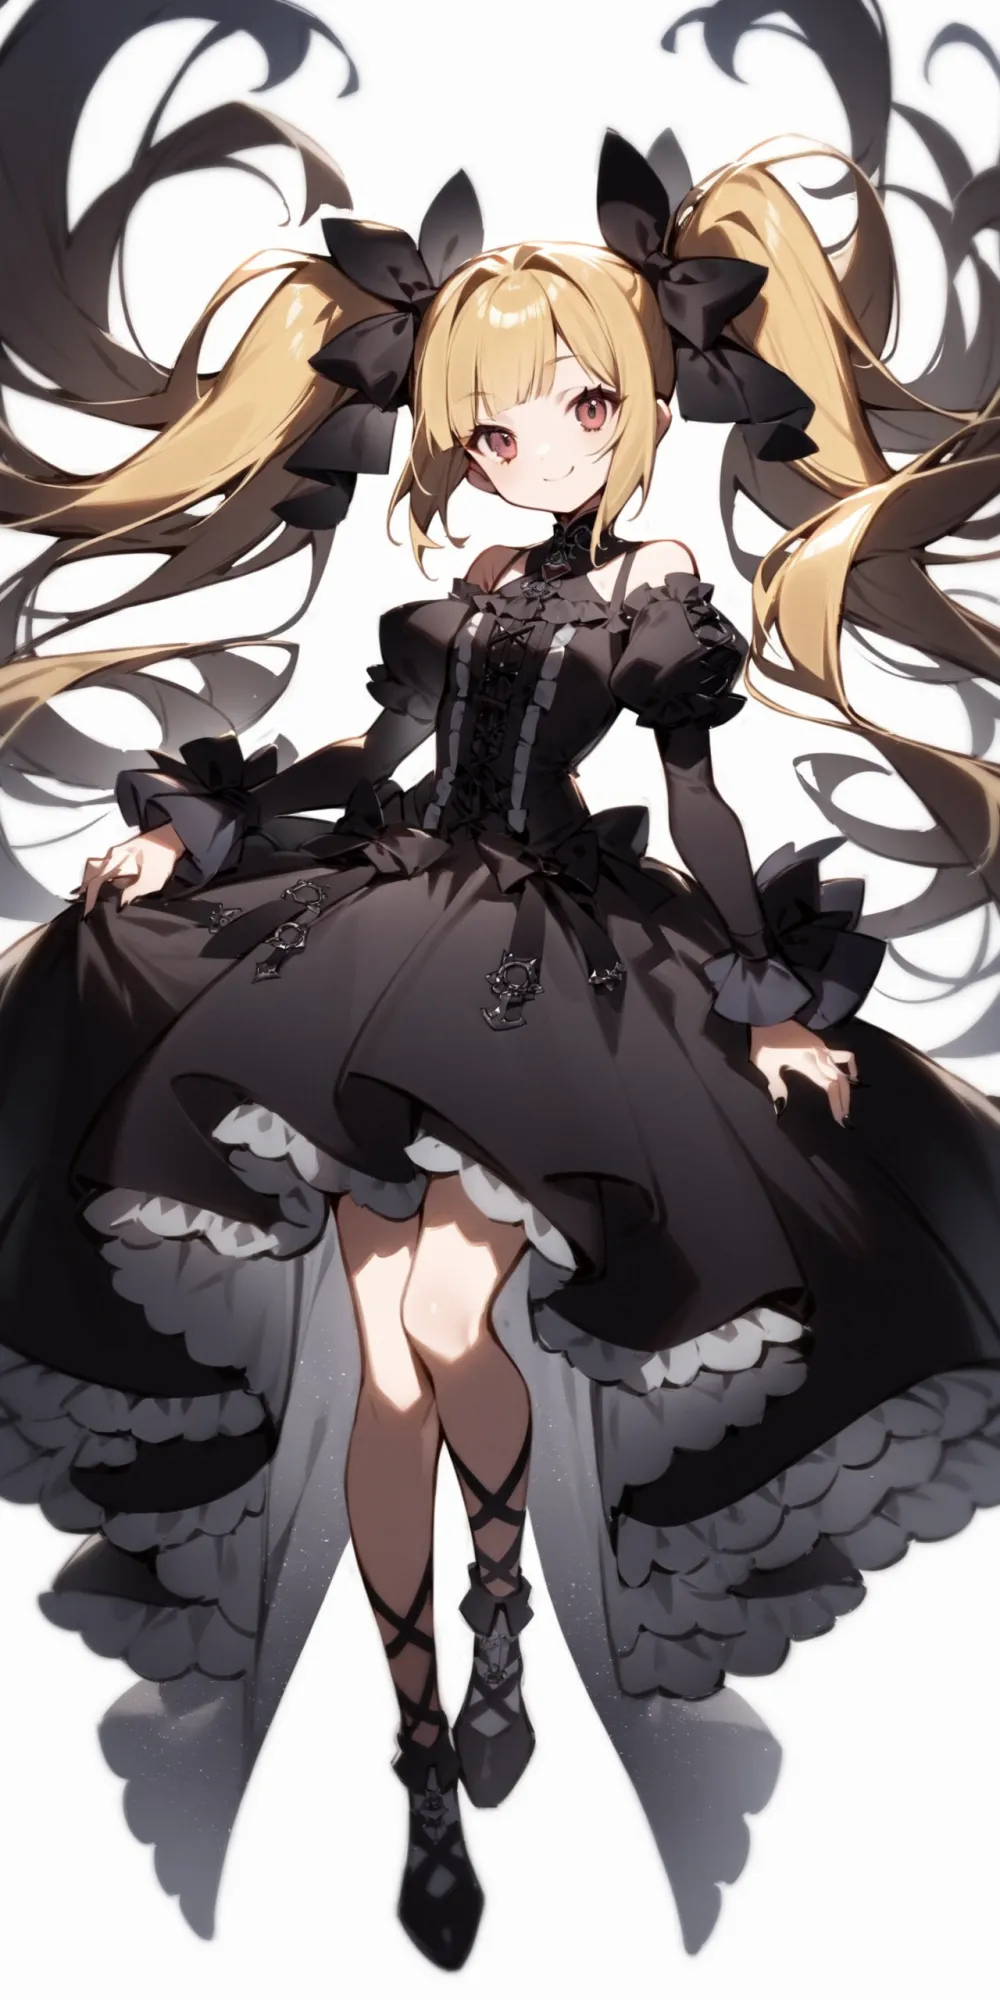 '1girl, gothic, blonde hair, twintails,\nsmile, closed mouth,\ntachi-e, fullbody, white background,\nAlice in glitterworld\nNegative prompt: (worst quality, low quality:1.4), nsfw\nSteps: 35, Sampler: DPM++ 2M SDE Karras, CFG scale: 7, Seed: 1, Size: 640x1280, Model hash: 642b08ca49, Model: ConfusionXL2.0_fp16_vae, VAE hash: 63aeecb90f, VAE: sdxl_vae_0.9.safetensors, Denoising strength: 0.6, Clip skip: 2, Hires upscale: 2, Hires steps: 15, Hires upscaler: ESRGAN_4x, Eta: 0.68, Version: v1.7.0'